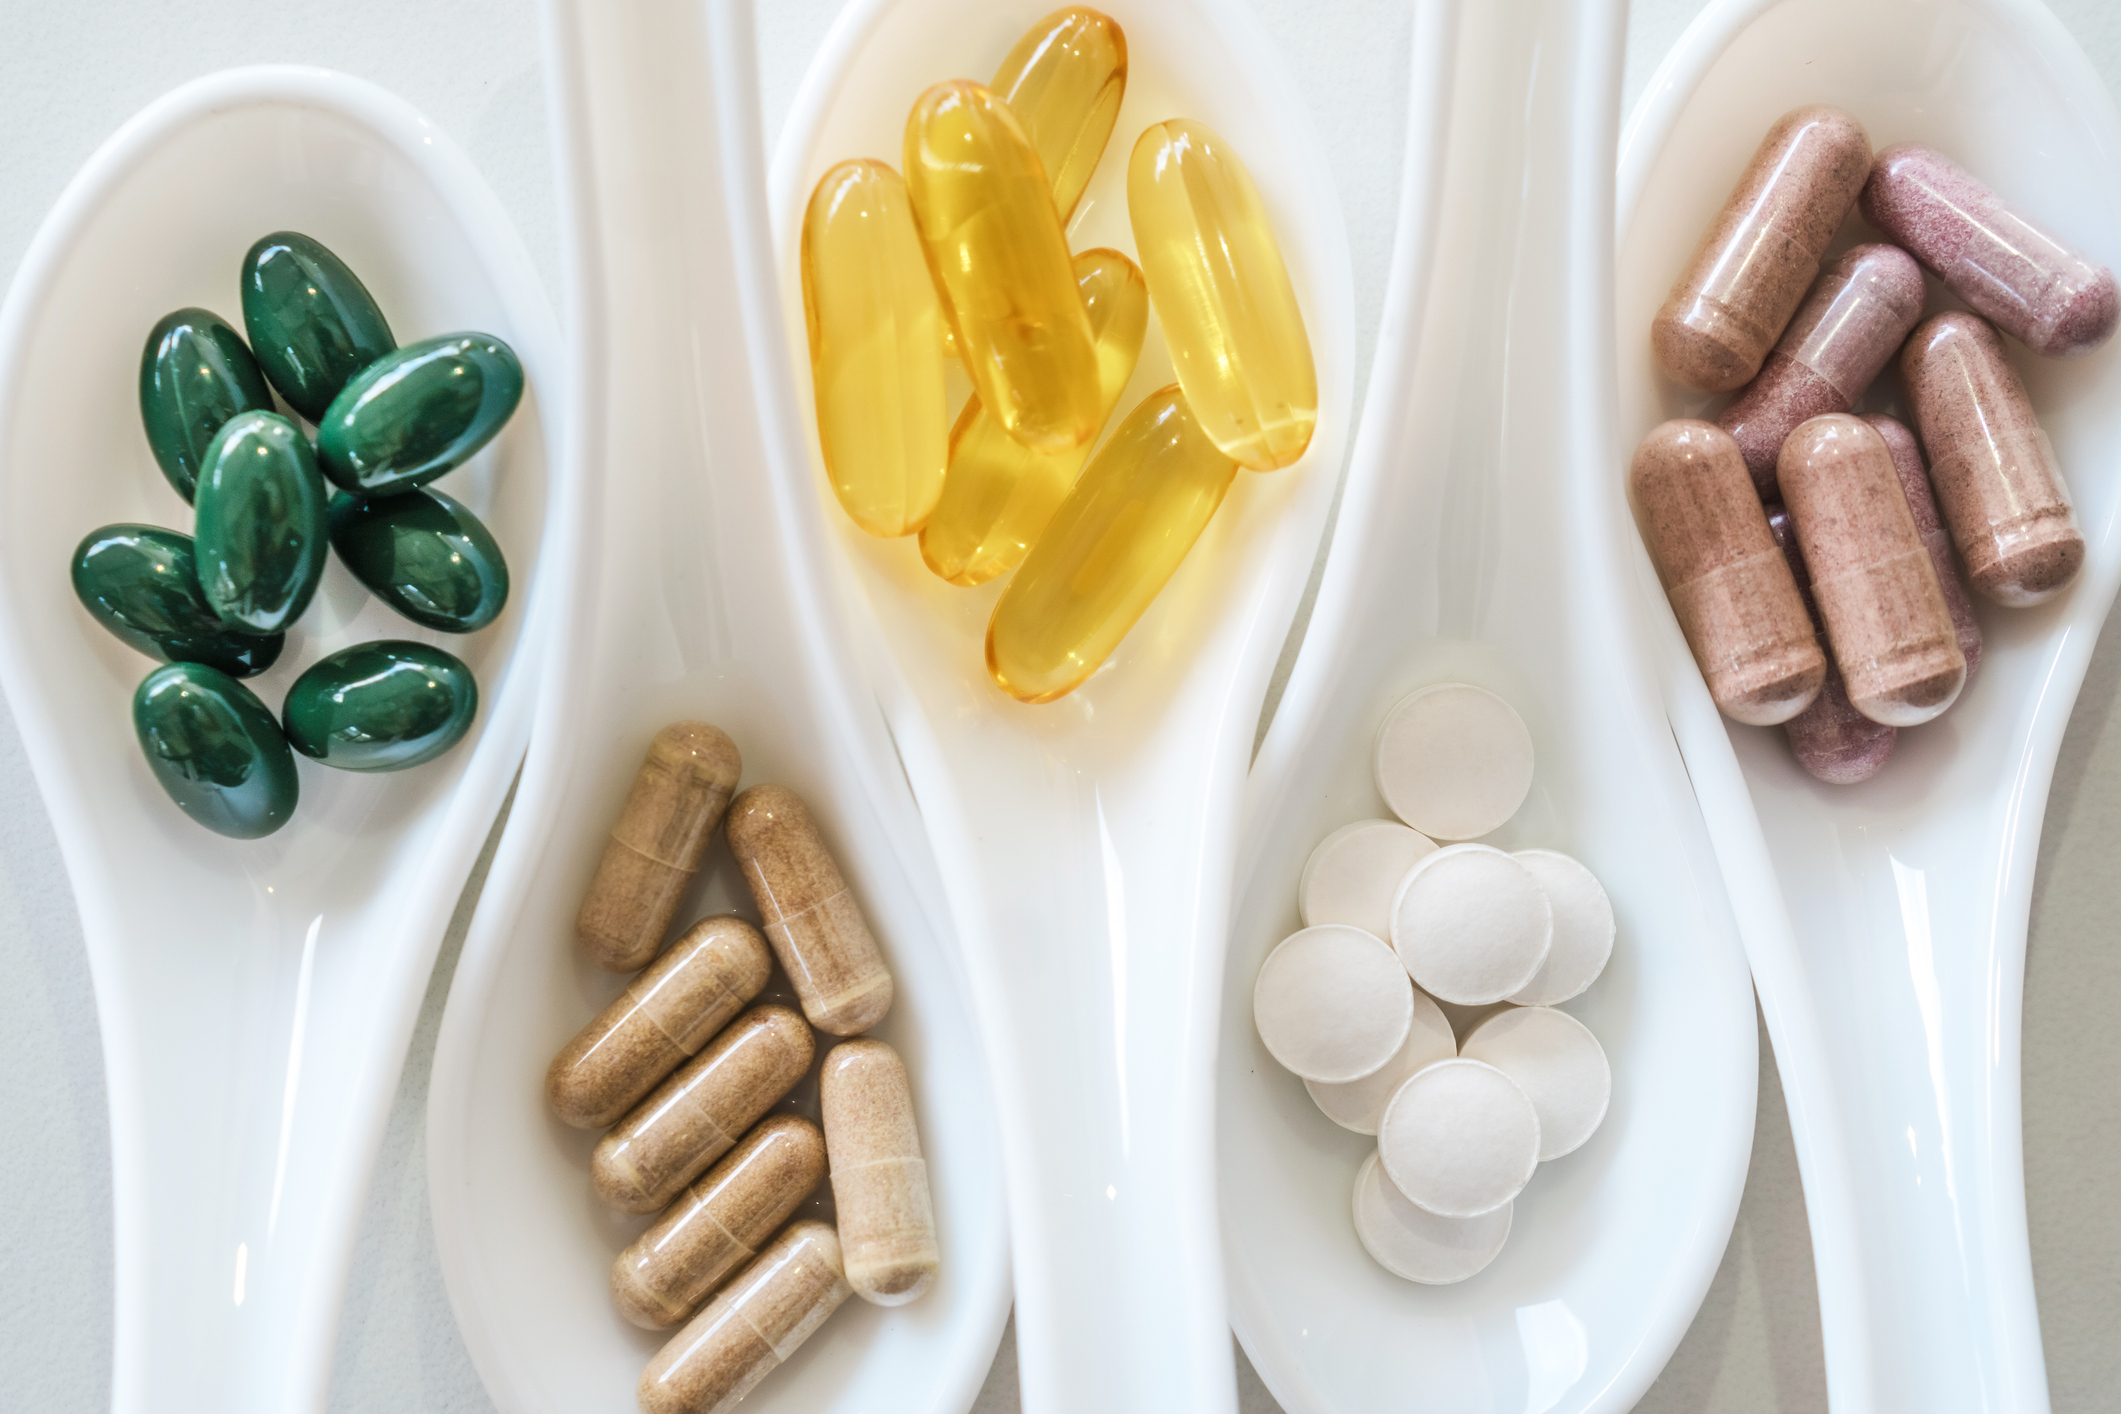 CRN survey: 80% of Americans are now using dietary supplements